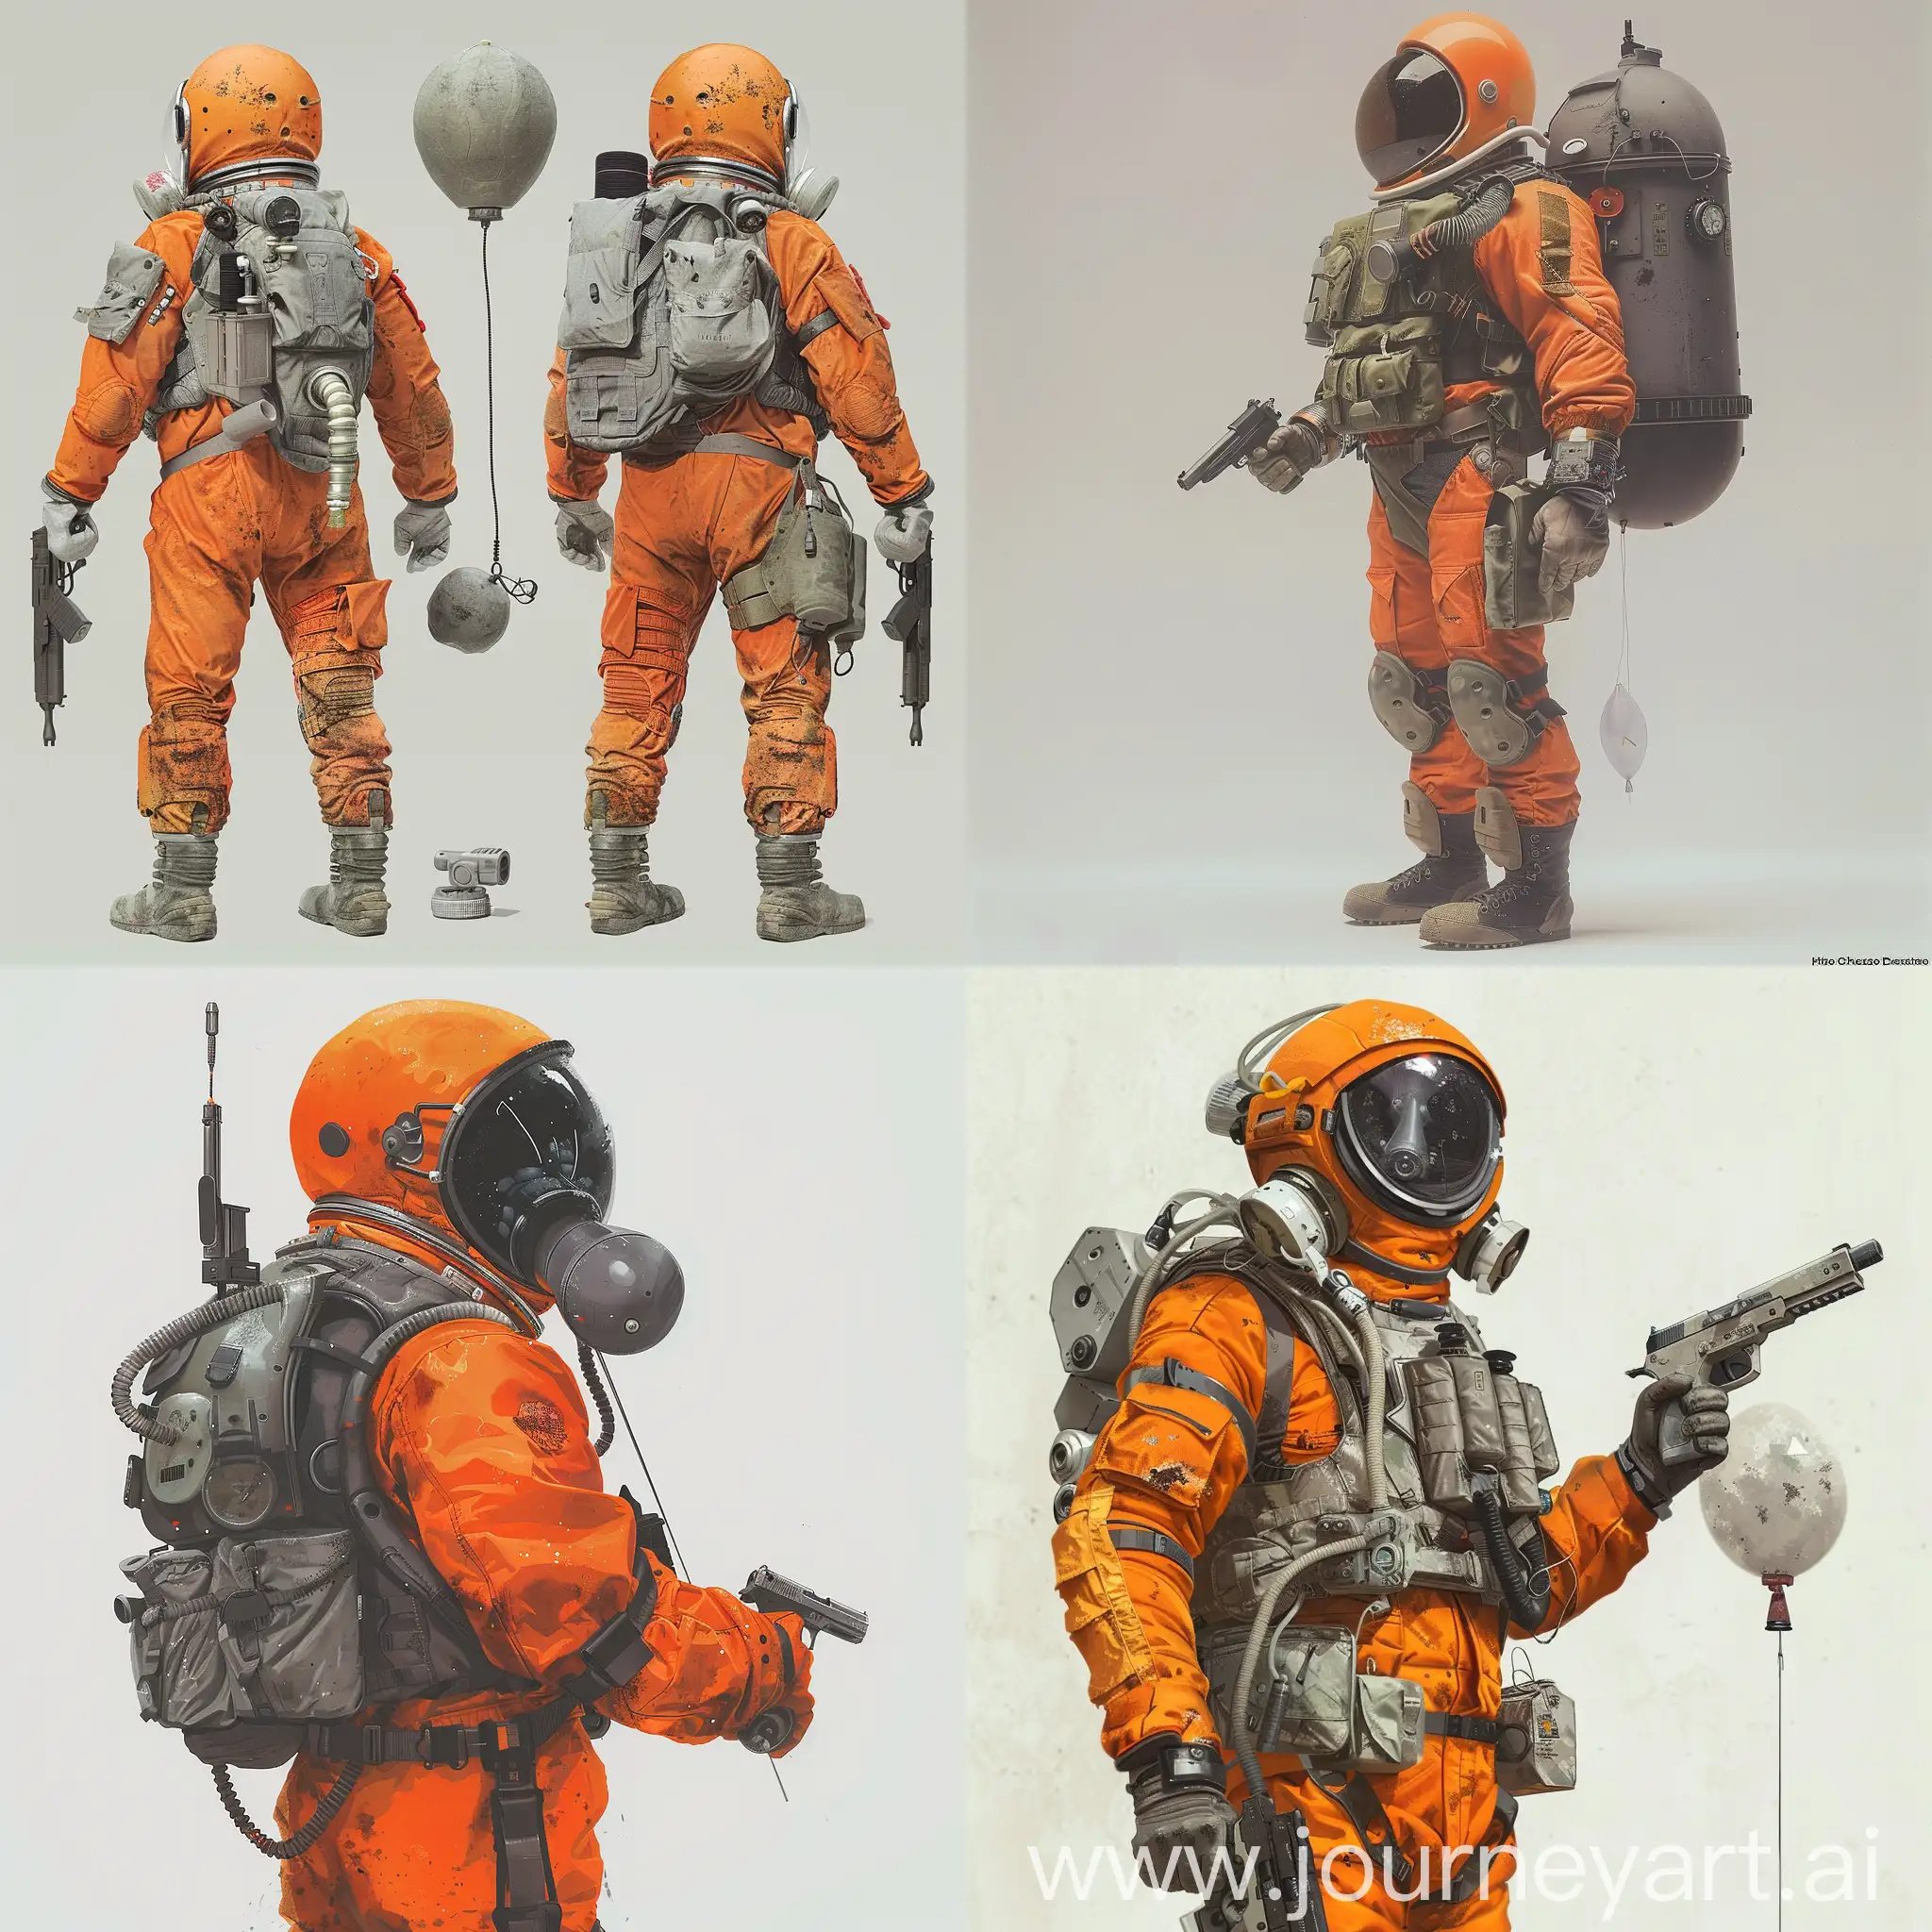 The concept art of chemical protection in 1980, chemical protection looks like a orange Soviet space suit without a spacehelmet, a gas mask instead of a spacehelmet, military gray bulletproof armor, a small breathing balloon on the back, a pistol in one hand.